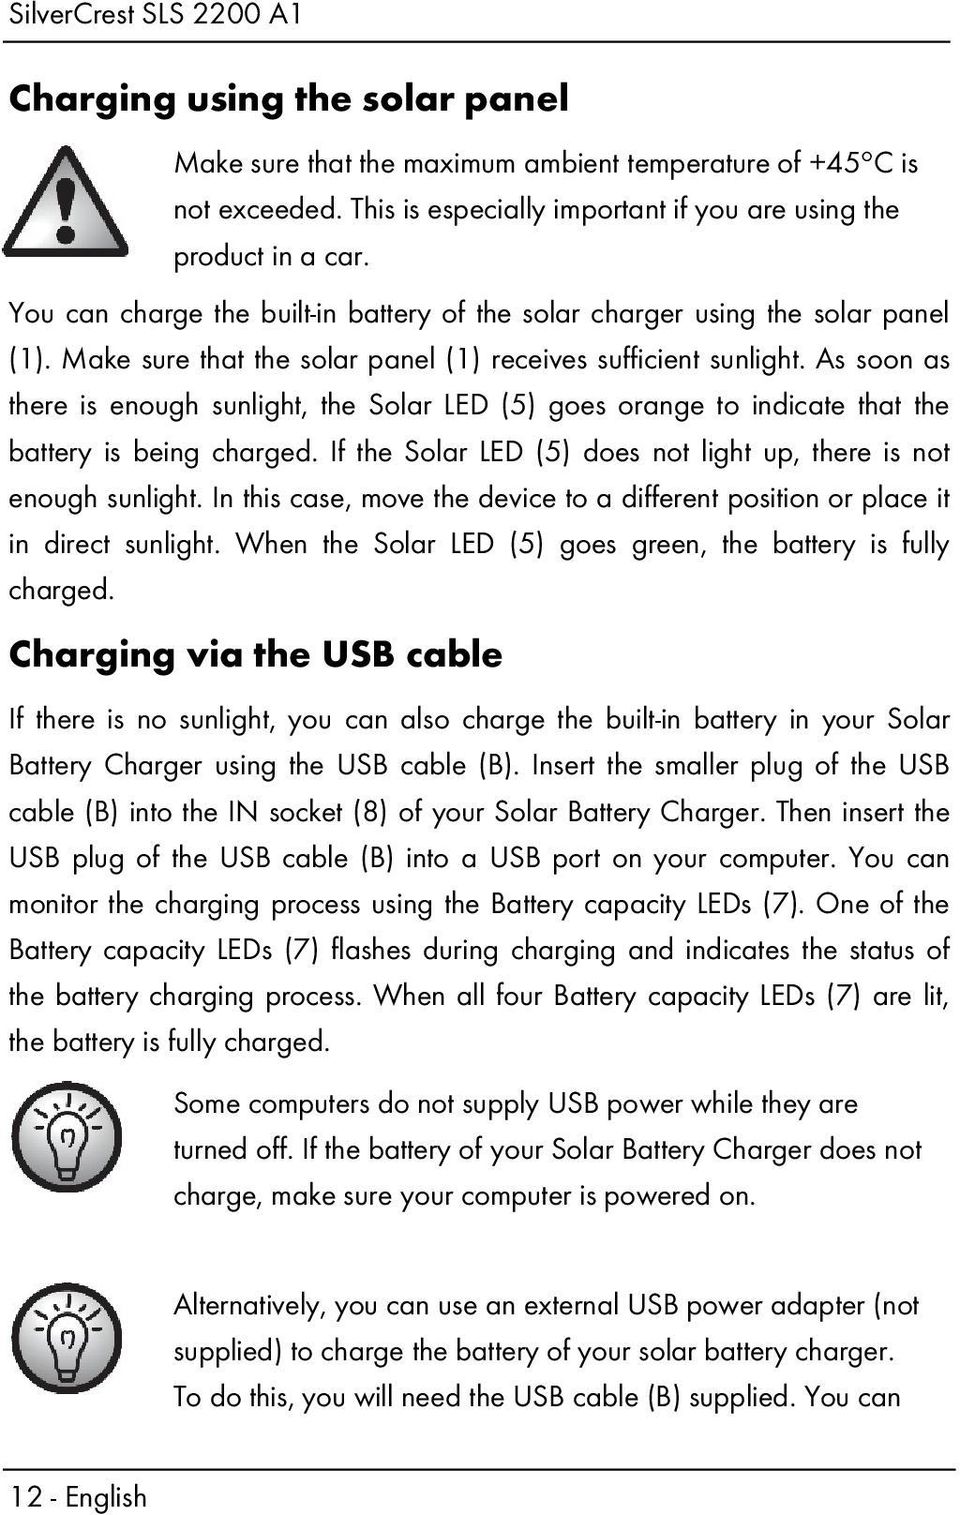 As soon as there is enough sunlight, the Solar LED (5) goes orange to indicate that the battery is being charged. If the Solar LED (5) does not light up, there is not enough sunlight.